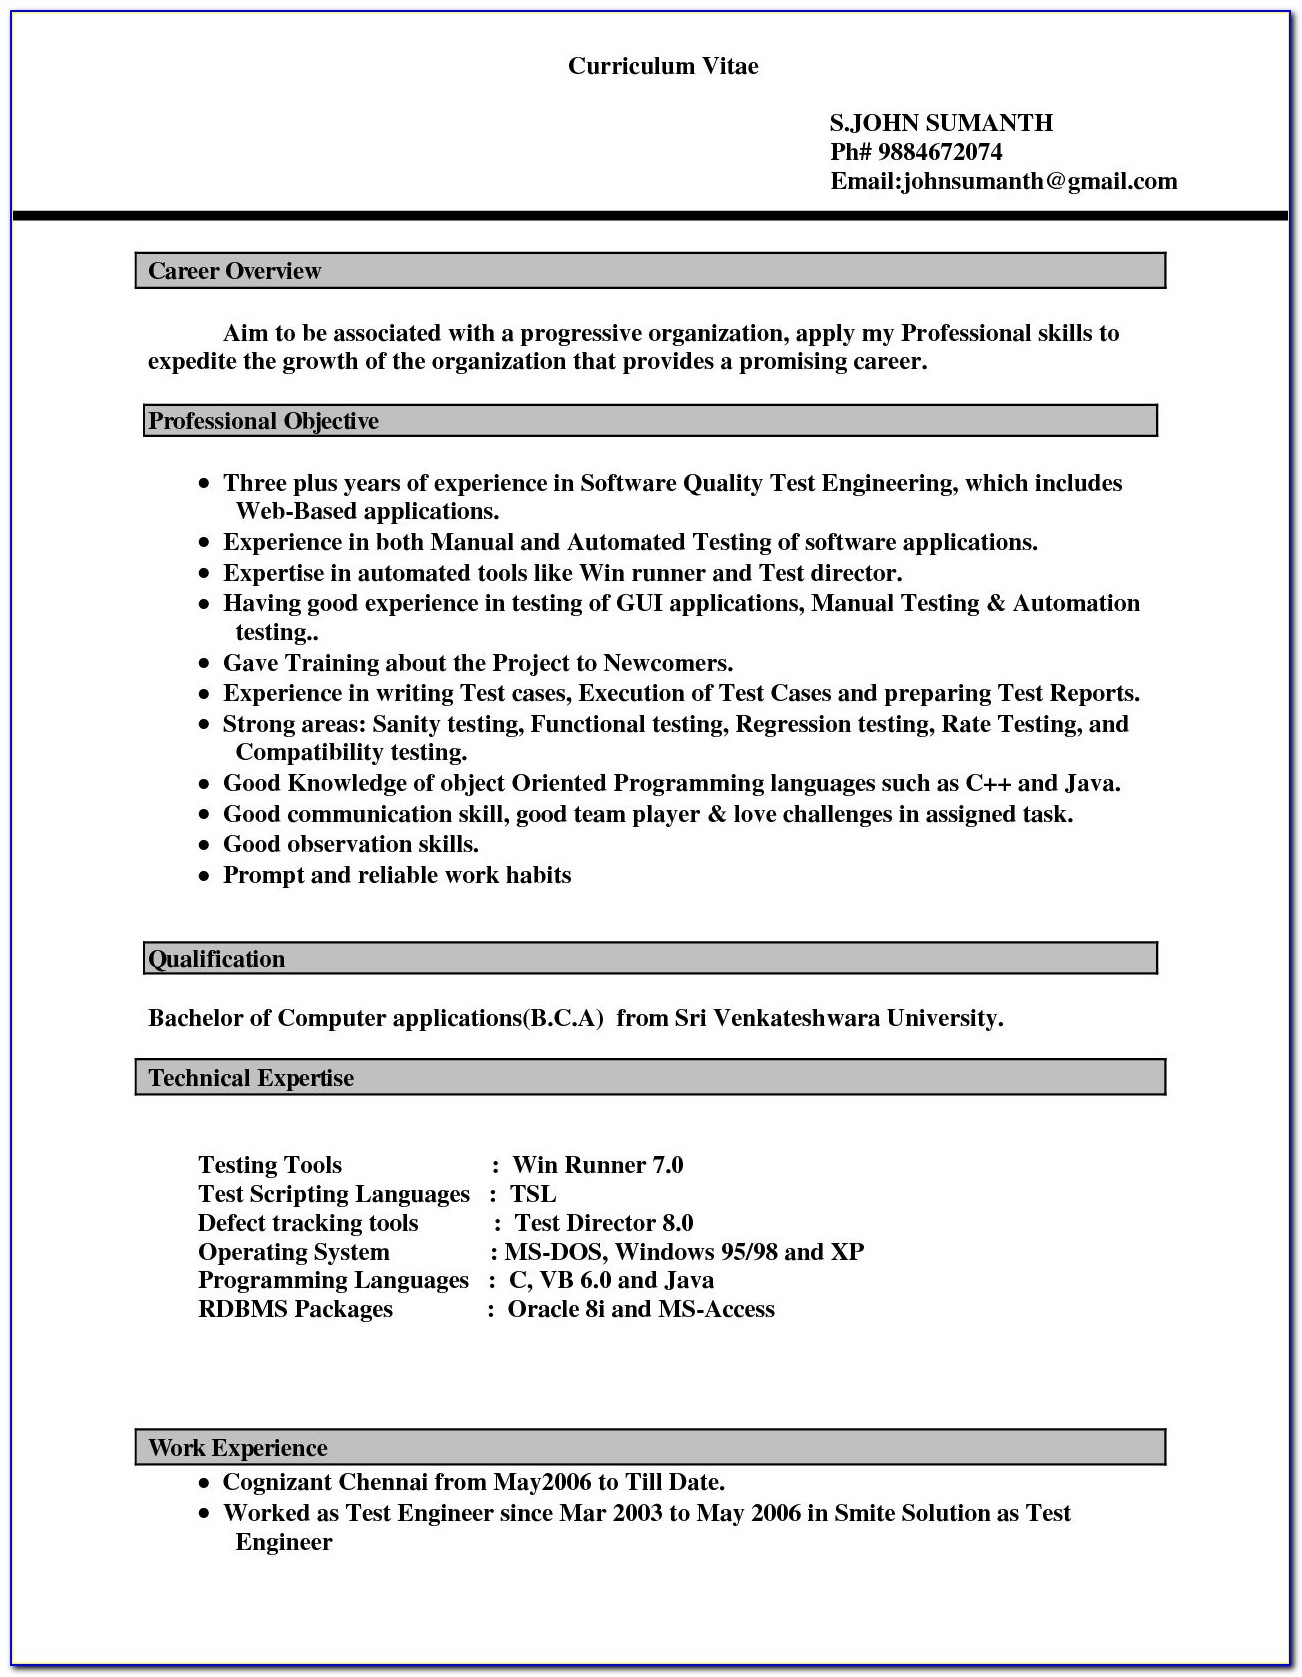 resume-format-download-in-ms-word-free